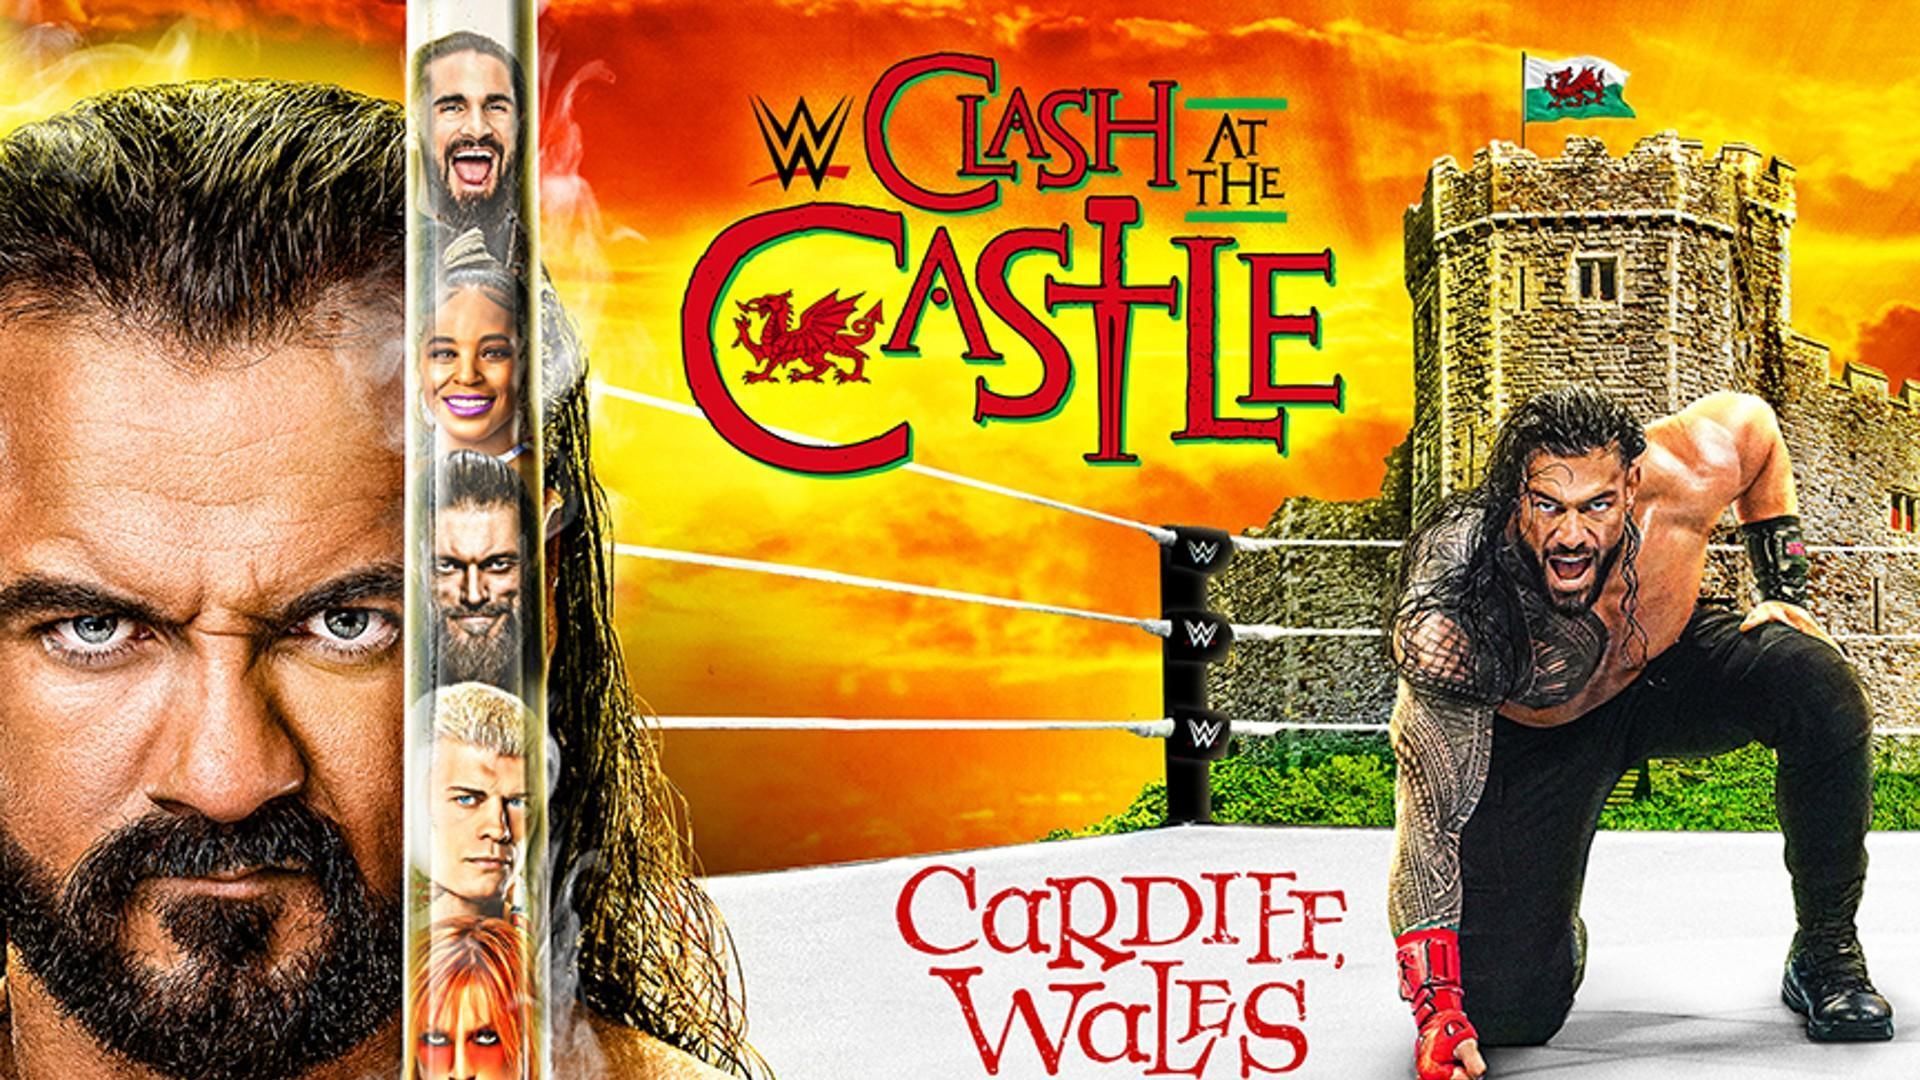 Are ya ready for a Clash at the Castle, mate?